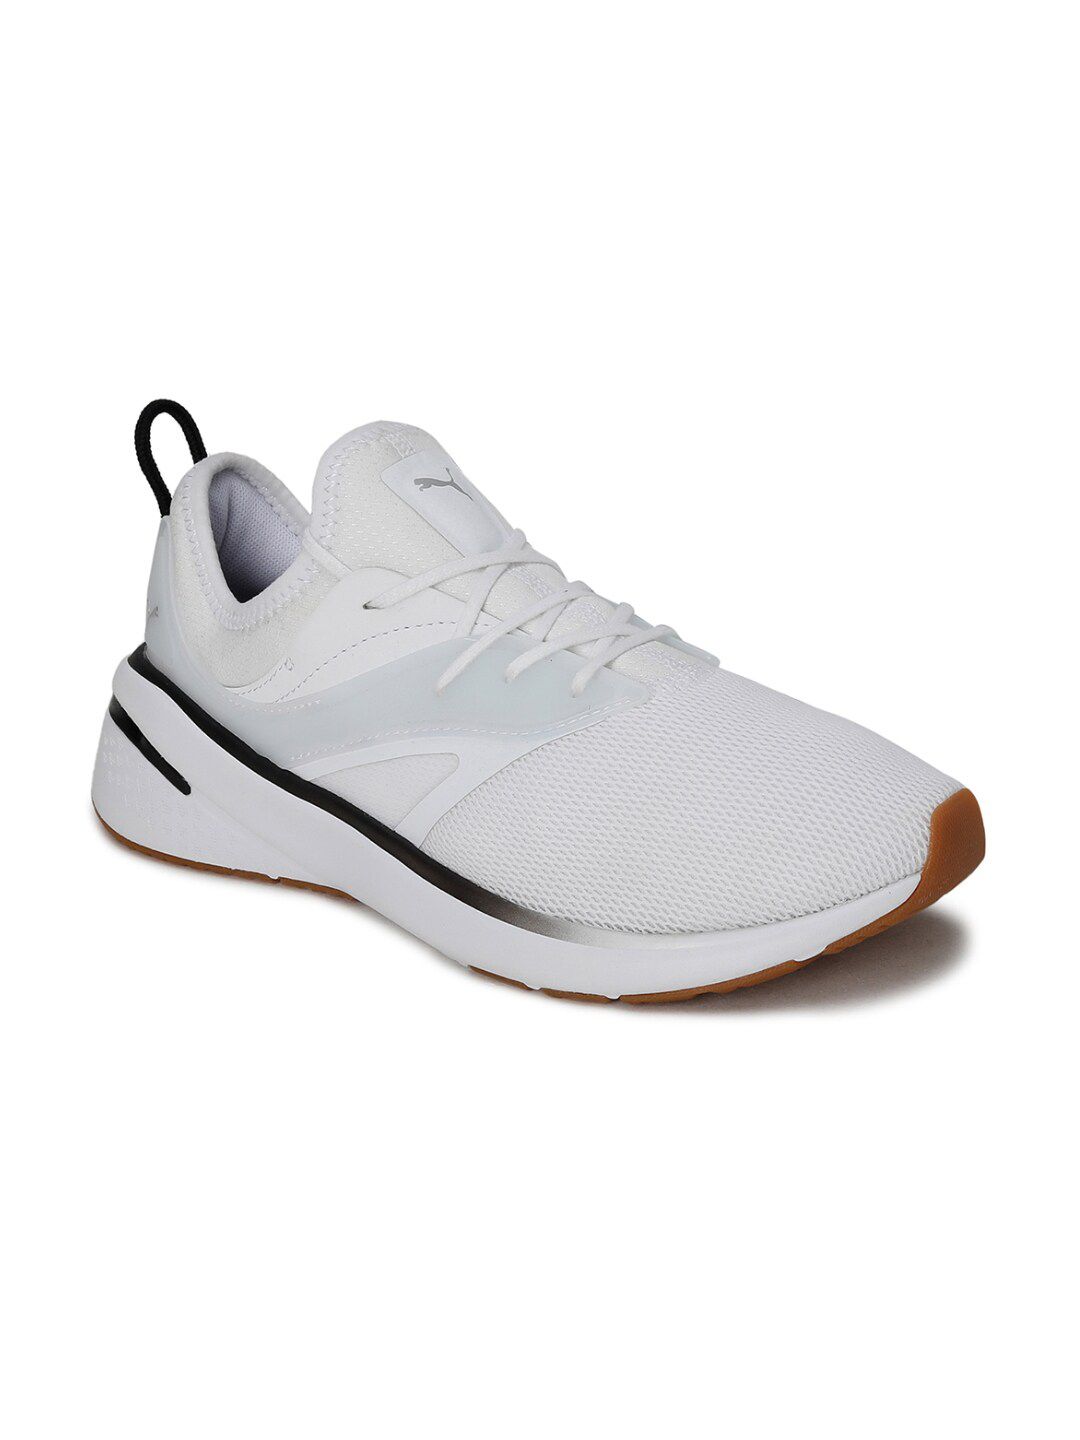 Puma Women Black Forever XT Fade Textile Training or Gym Shoes Price in India